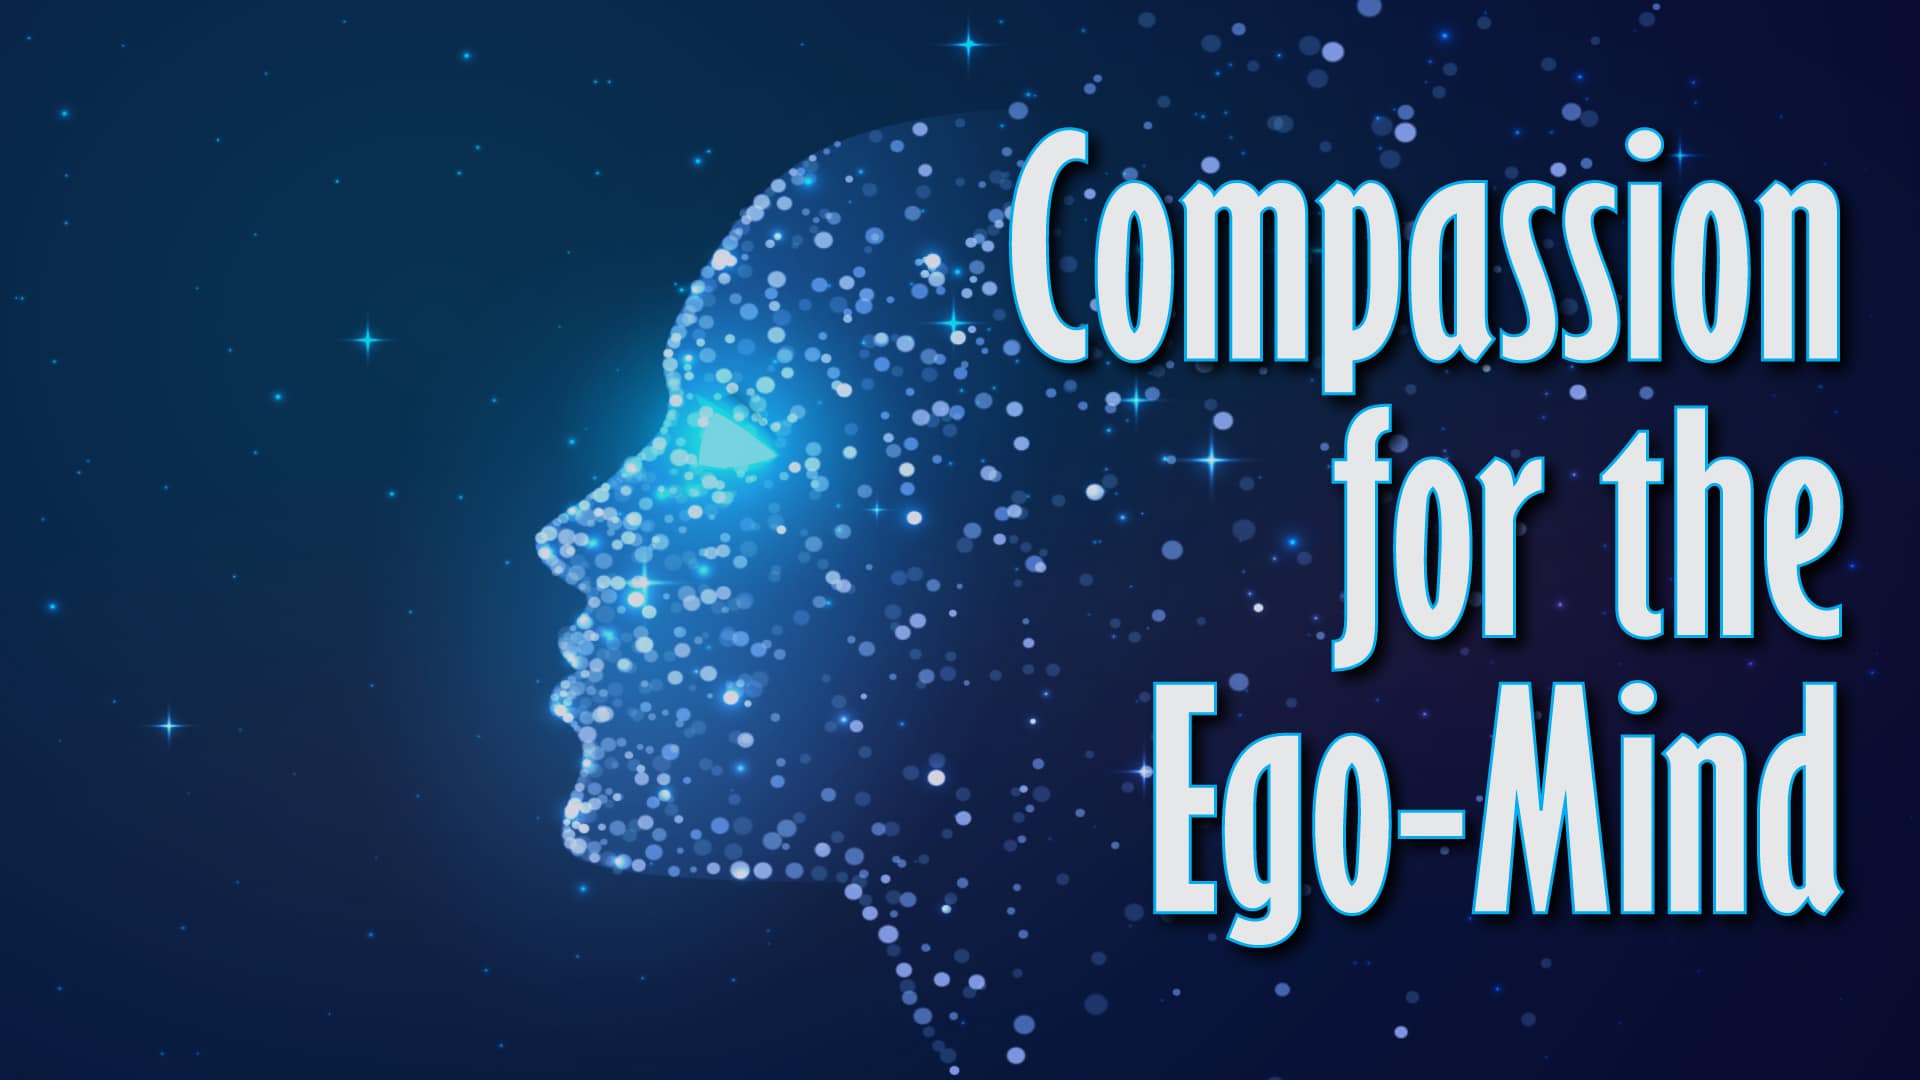 Compassion for the Ego-Mind